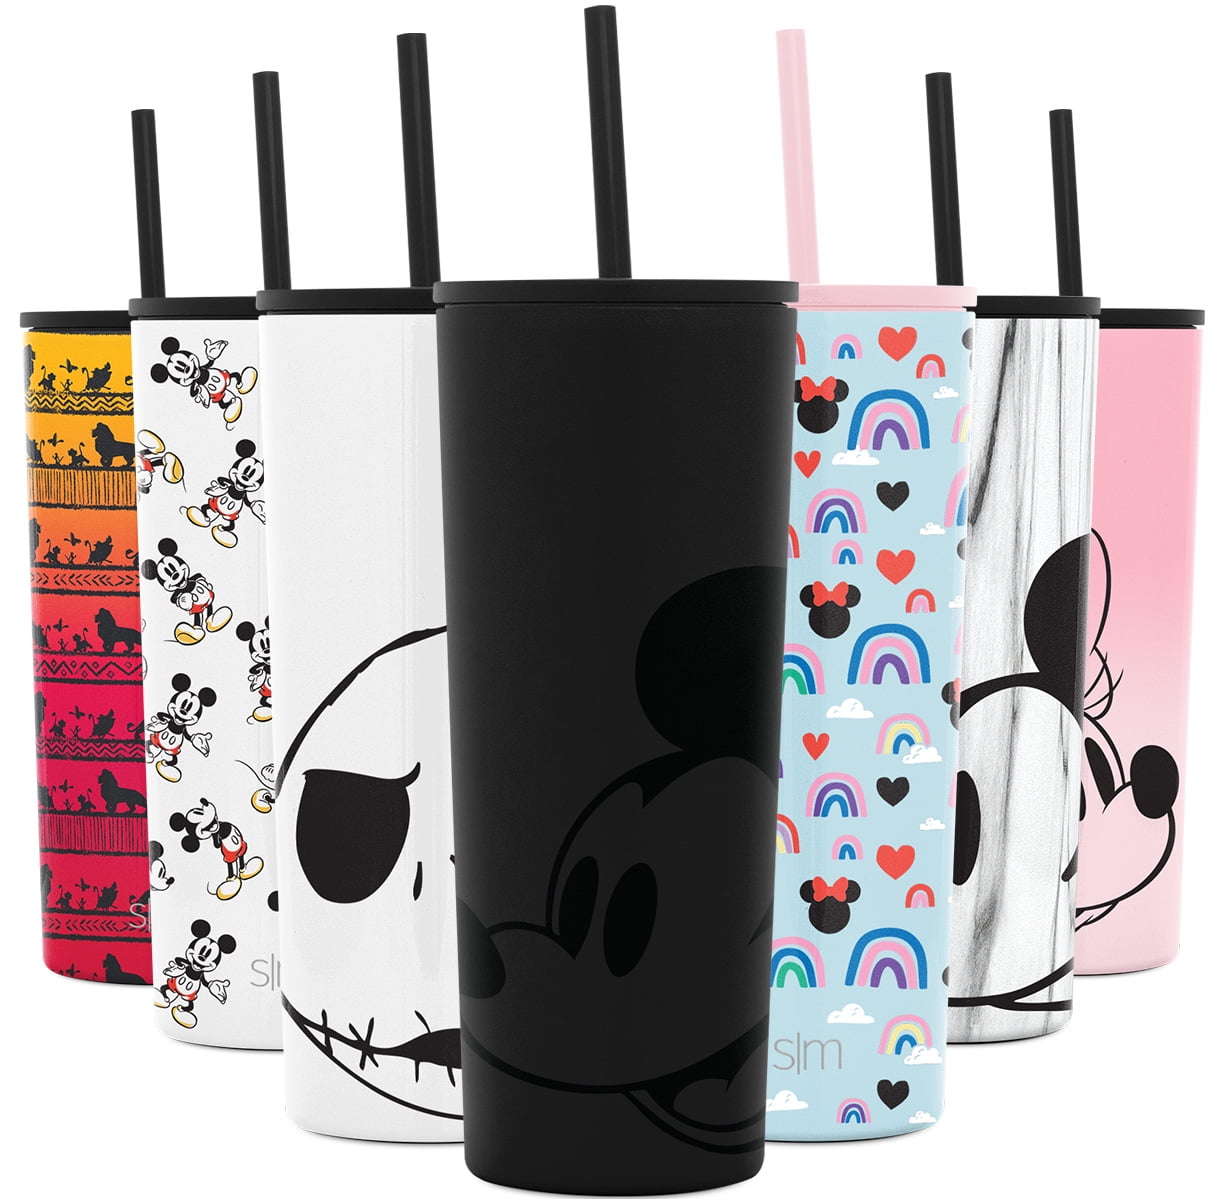 1100ml/39oz Disney Large Capacity Stainless Steel Straw Cup